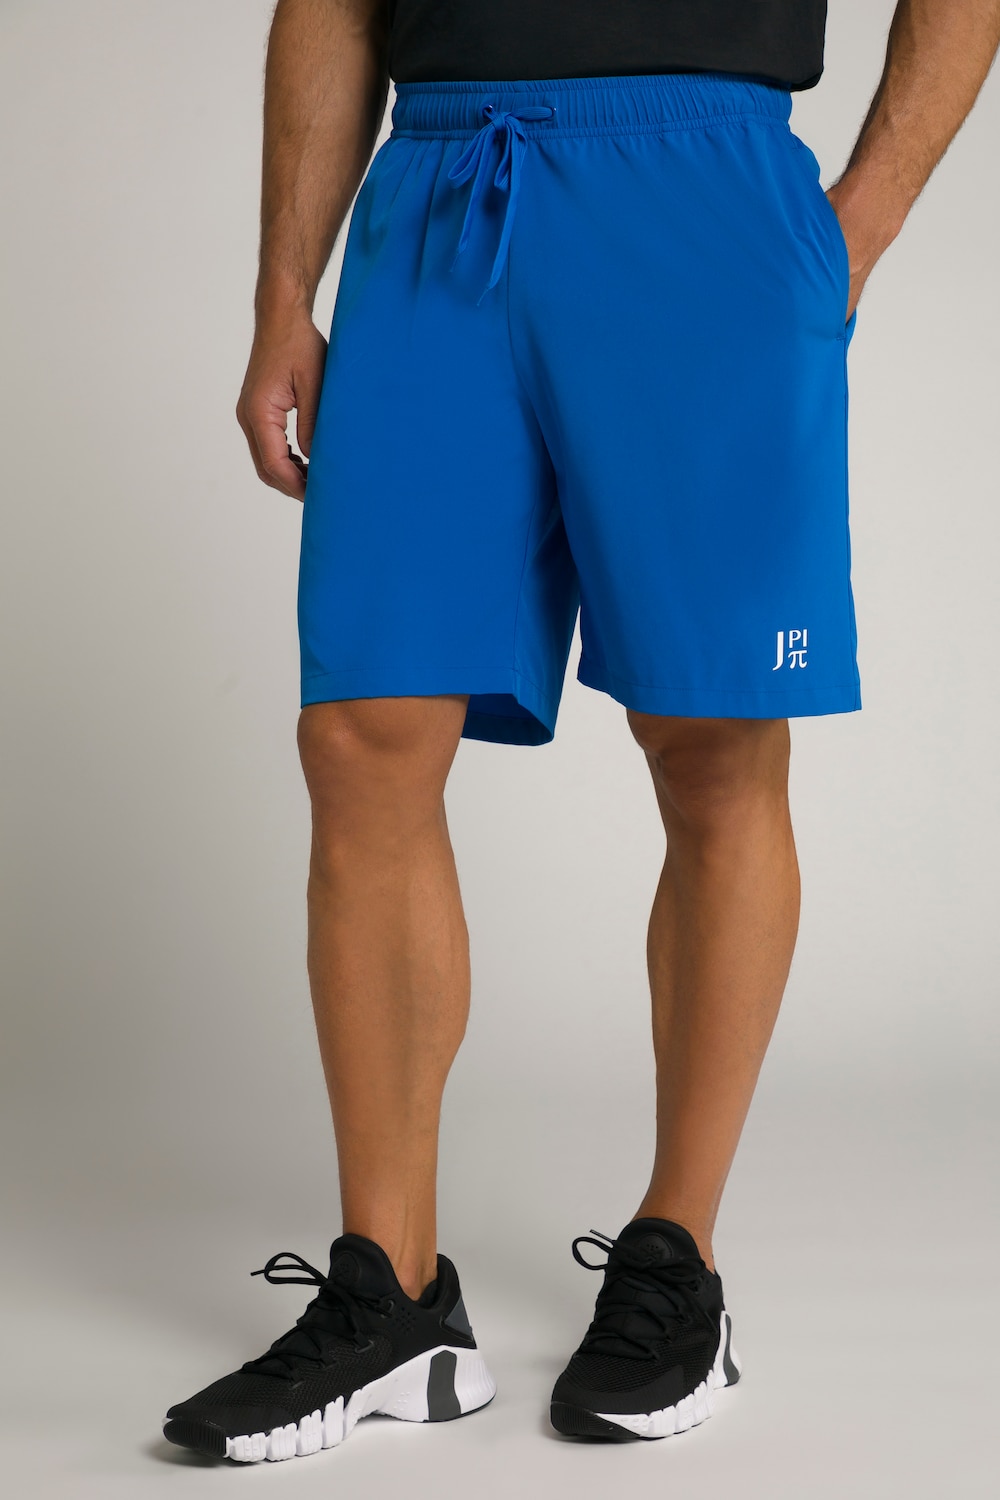 Grote Maten JAY-PI functionele sportshortsmale, blauw, Maat: 5XL, Polyester, JAY-PI